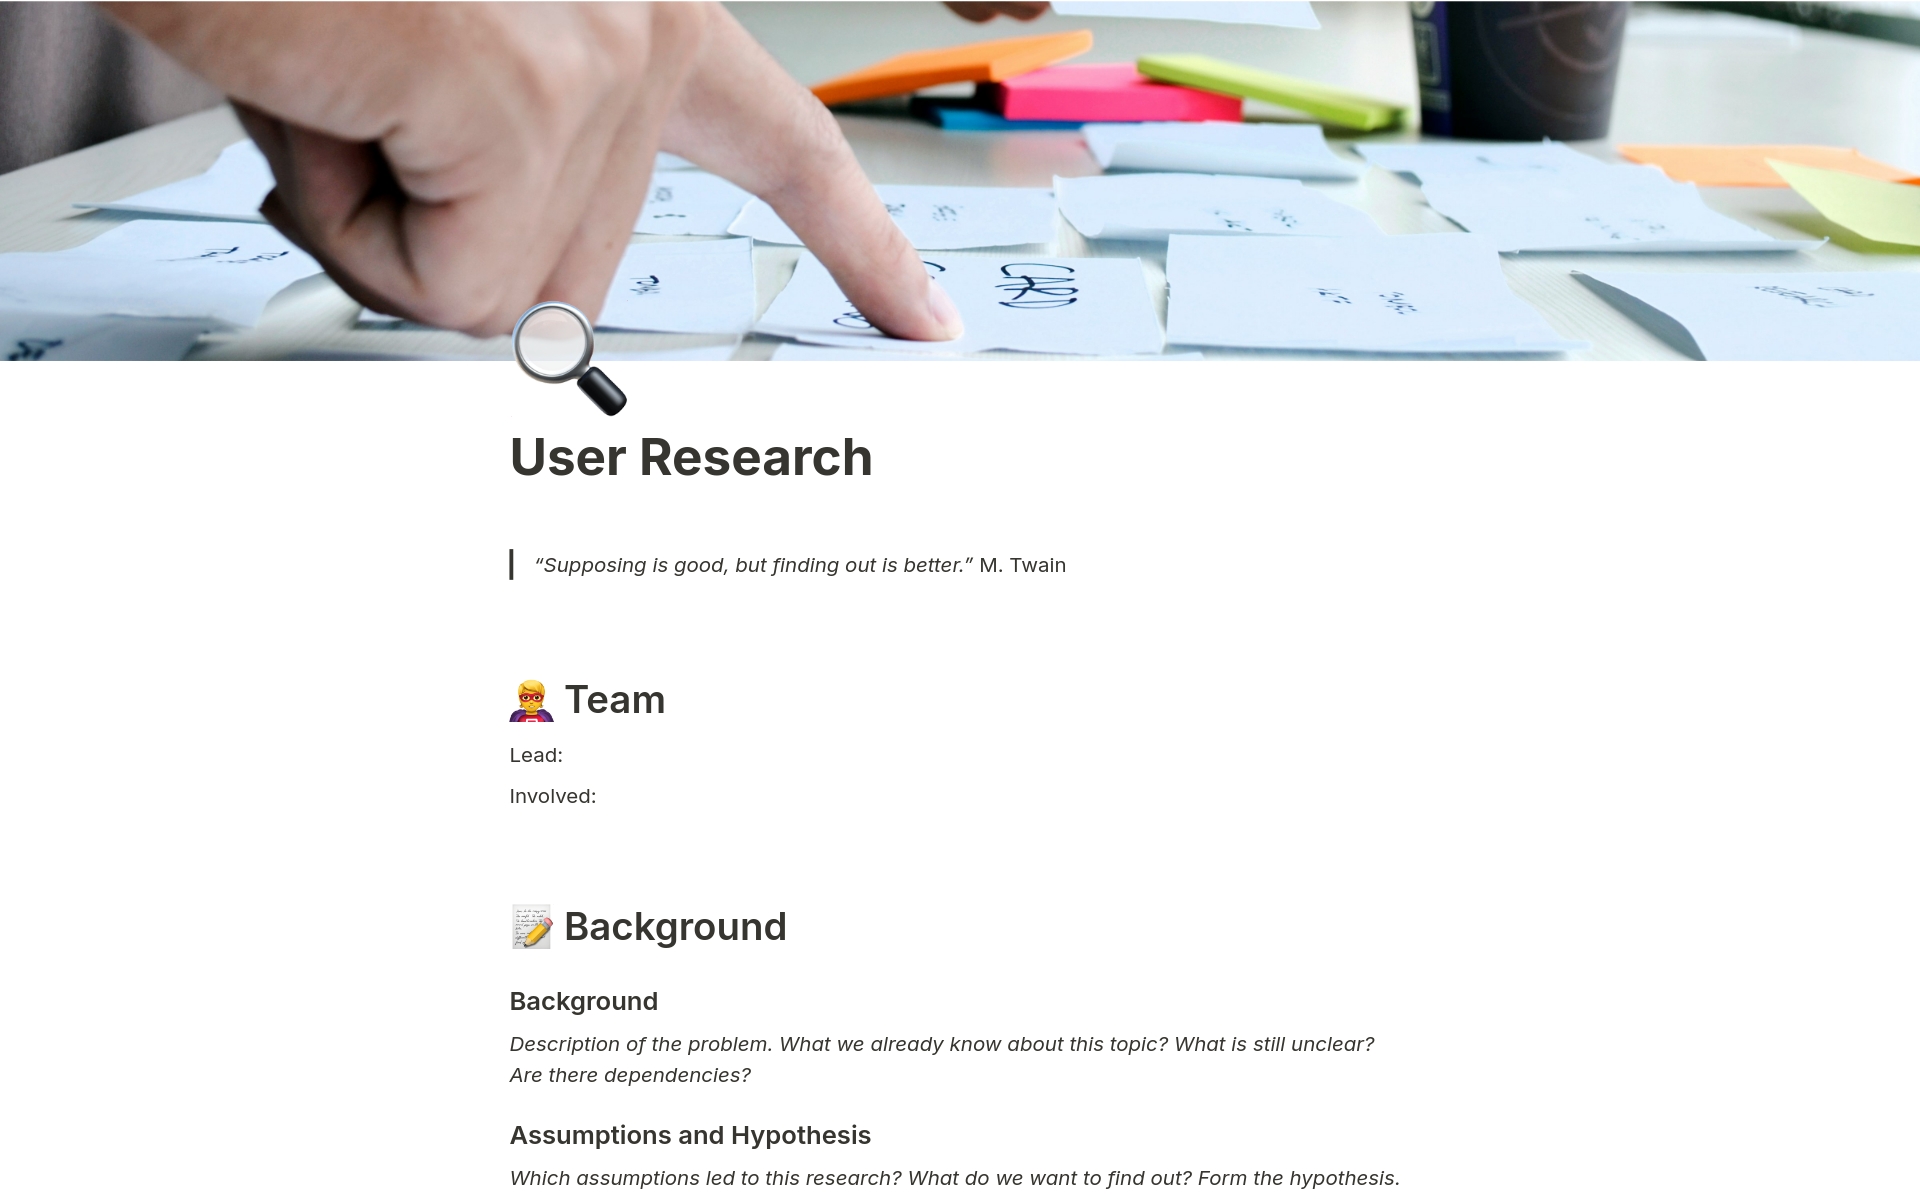 The template provides a comprehensive framework for conducting user research, from tracking research backlog and outlining research brief to recruiting participants and organising interviews and surveys, all the way through to synthesis and action points.